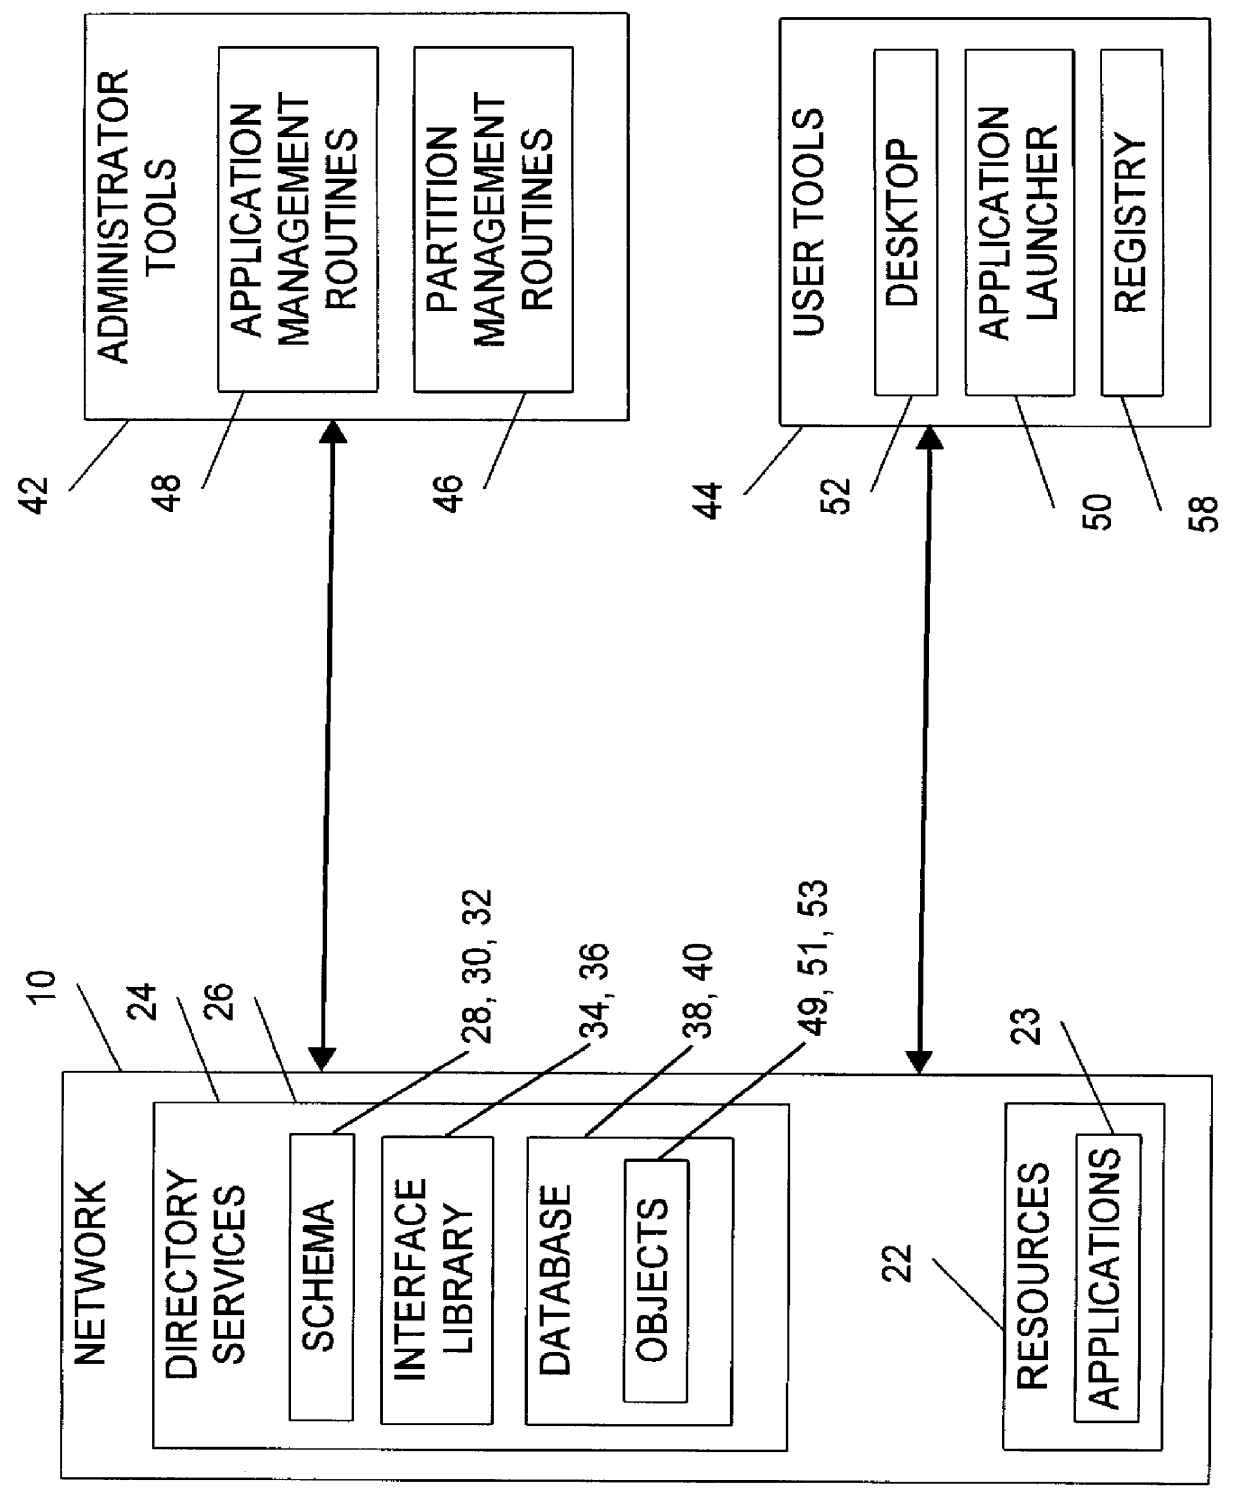 System for replicating and associating file types with application programs among plurality of partitions in a server